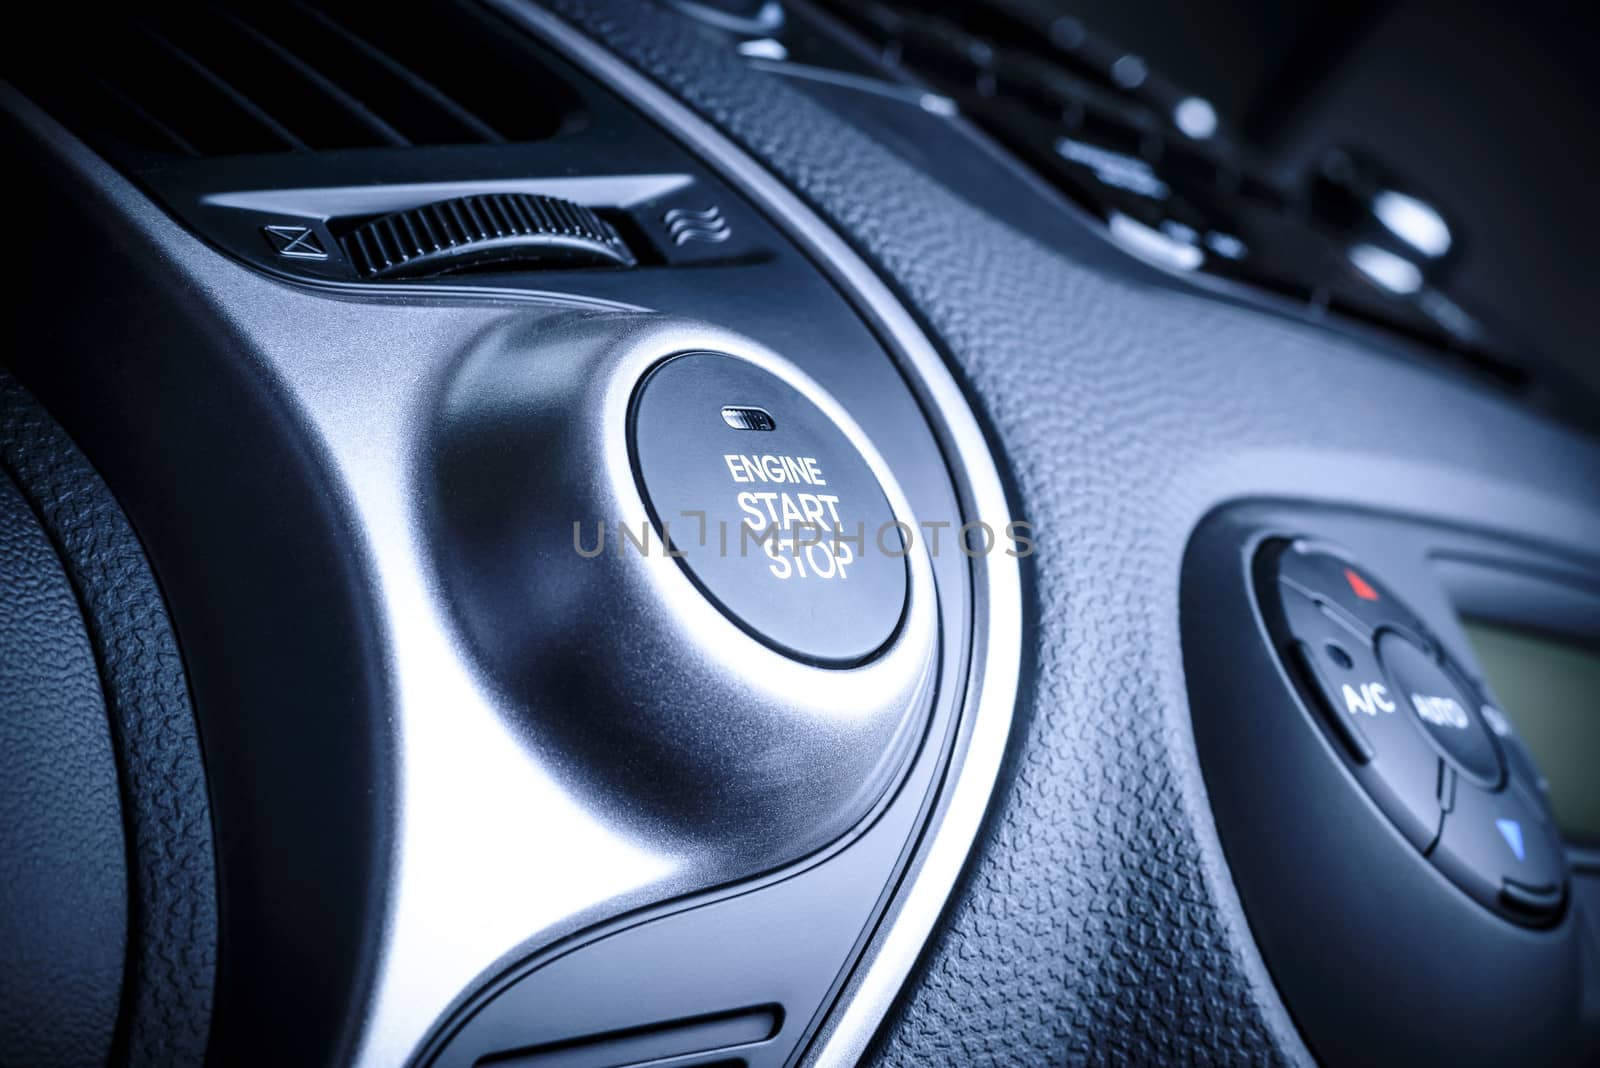 START/STOP ignition button in car, vehicle with visible fragment of instrument panel in vehicle interior.